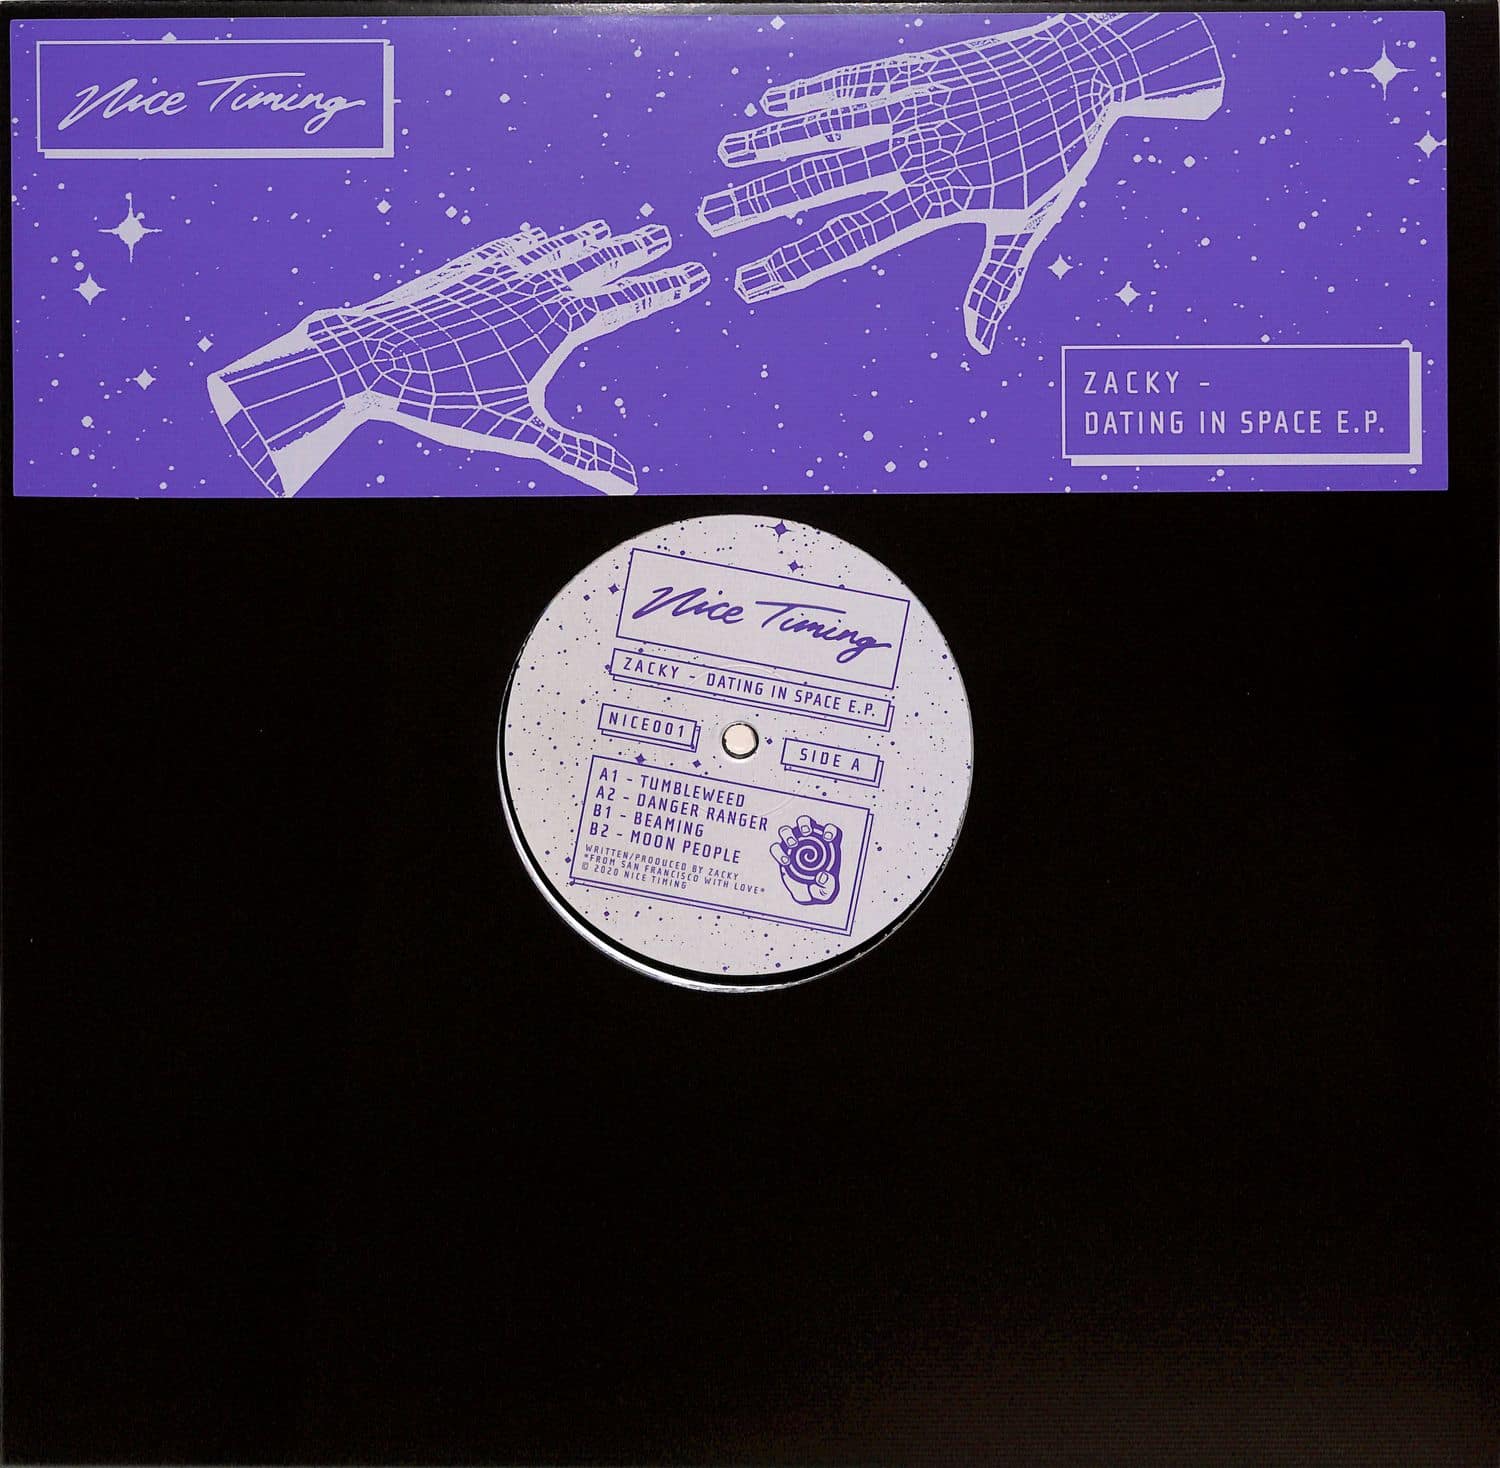 Zacky - DATING IN SPACE E.P.